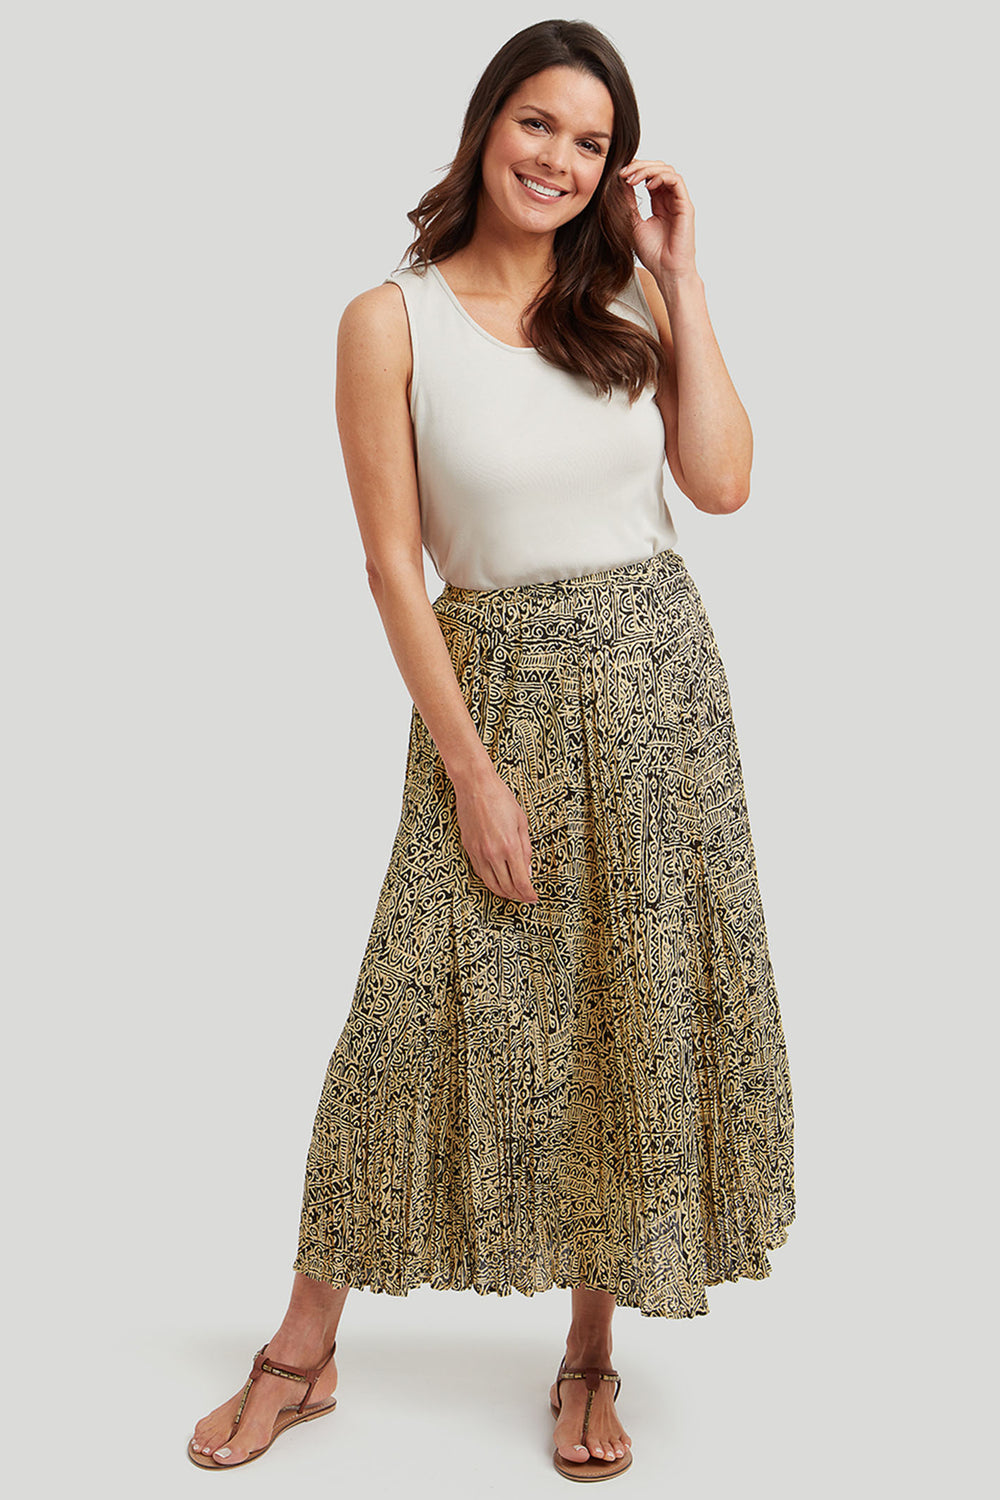 Adini 4231815C529 Kay Taupe Neutral Mix Crinkled Stencil Print Skirt - Dotique